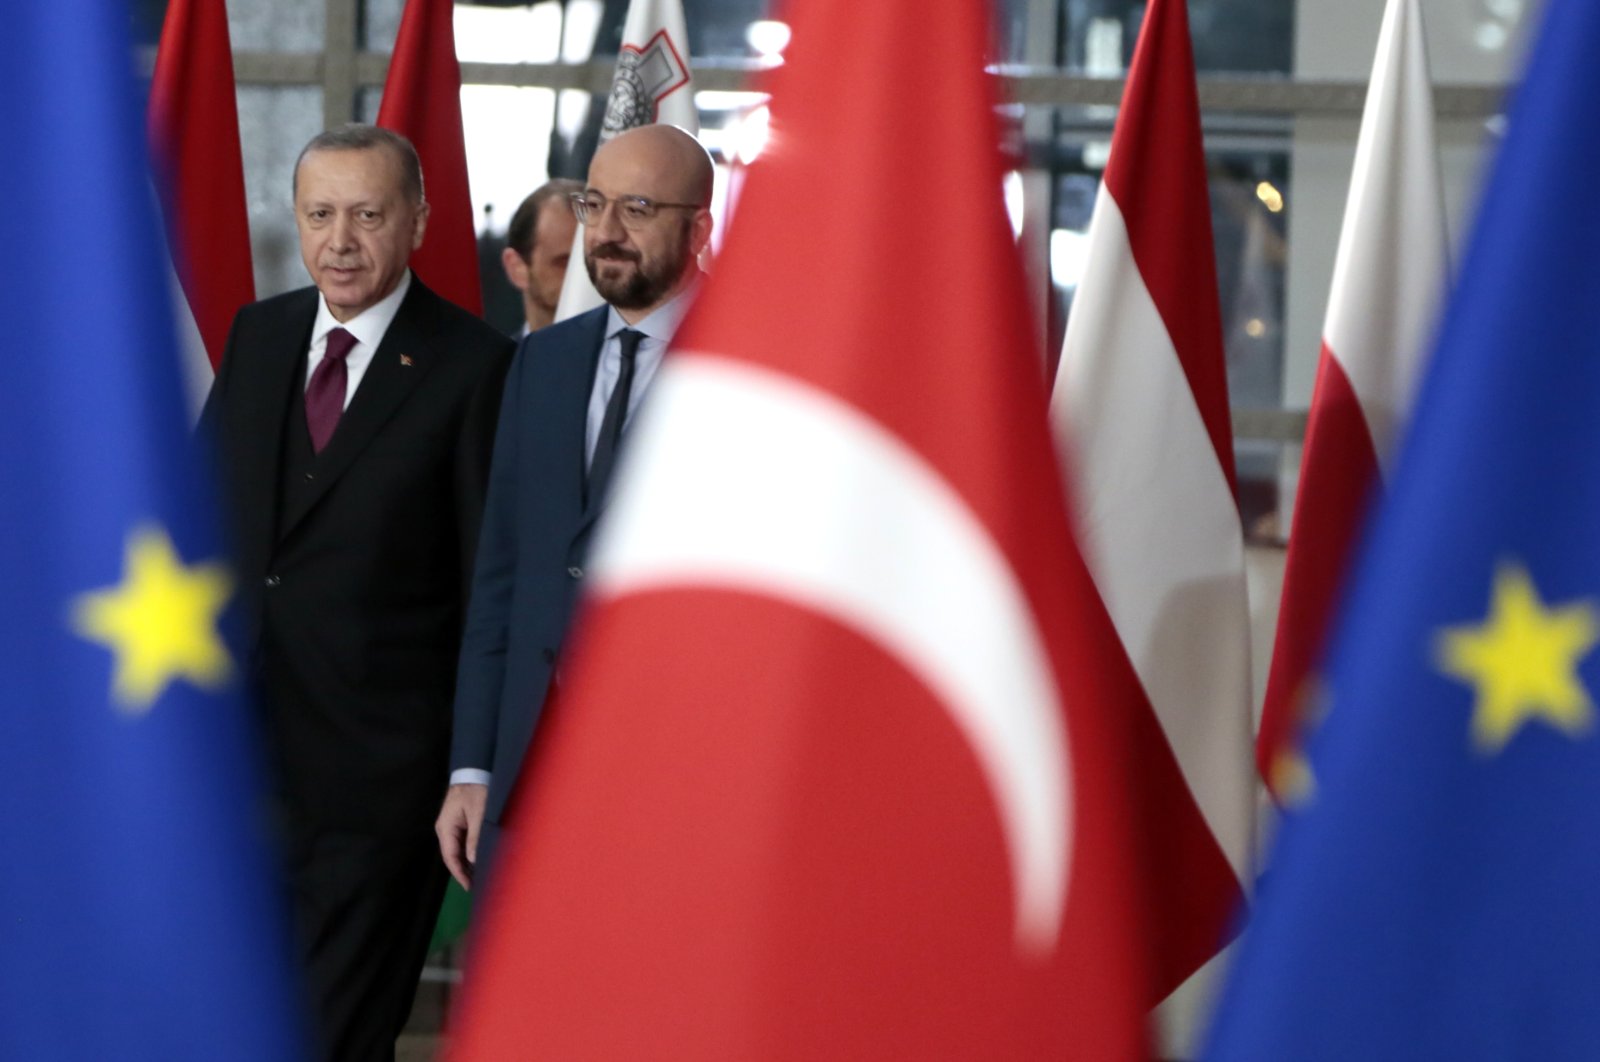 President Recep Tayyip Erdoğan walks with European Council President Charles Michel (R) prior to a meeting at the European Council building in Brussels, Belgium, March 9, 2020. (AP Photo)